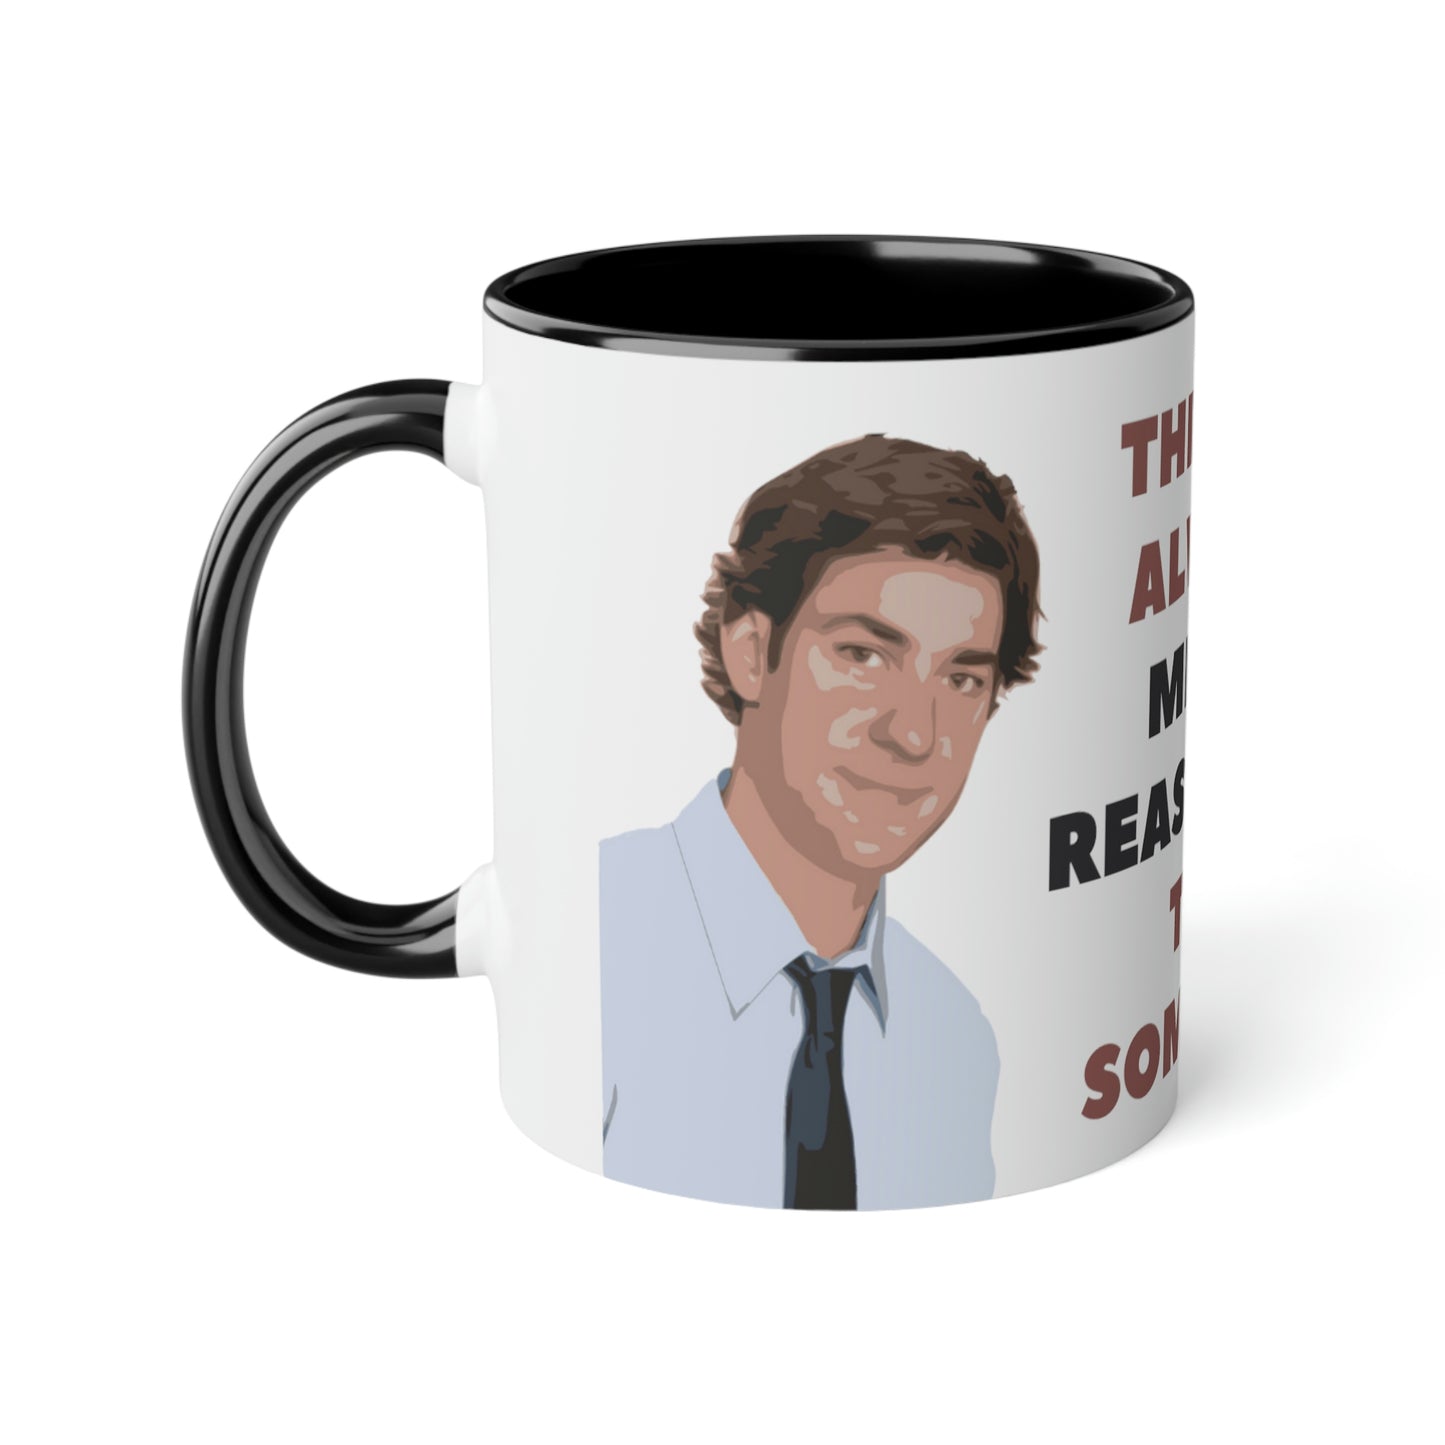 Meme Mug Dunder Mifflin workplace comedy - There are always a million reasons not to do something